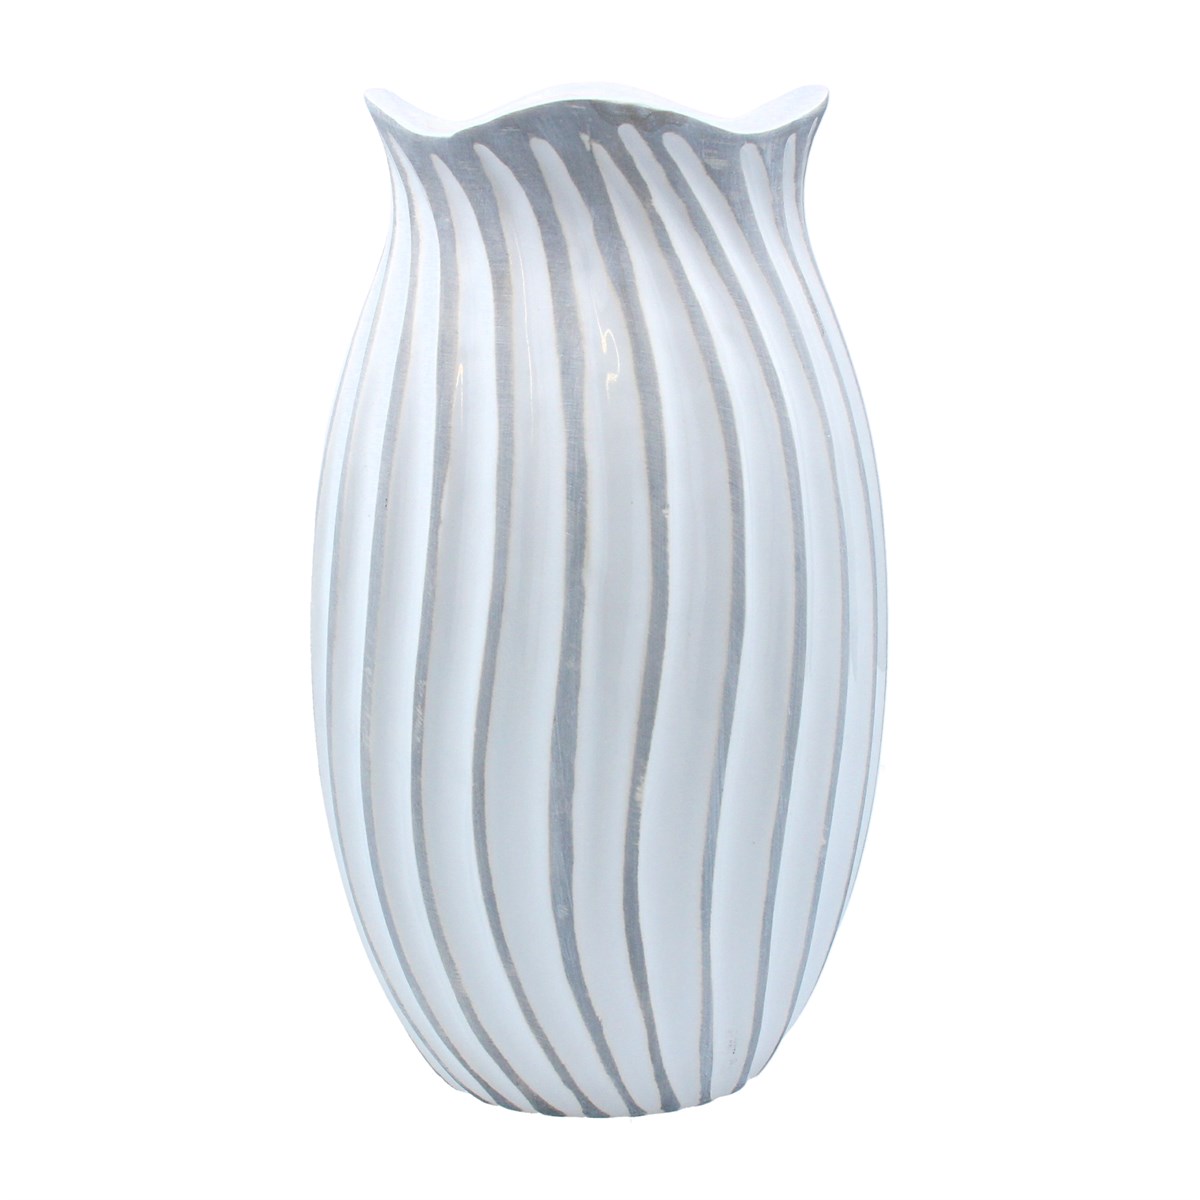 A large white and grey ceramic pot cover with all over wave design. The perfect addition to your home or the perfect gift for yourself or a loved one. By London designer Gisela Graham.